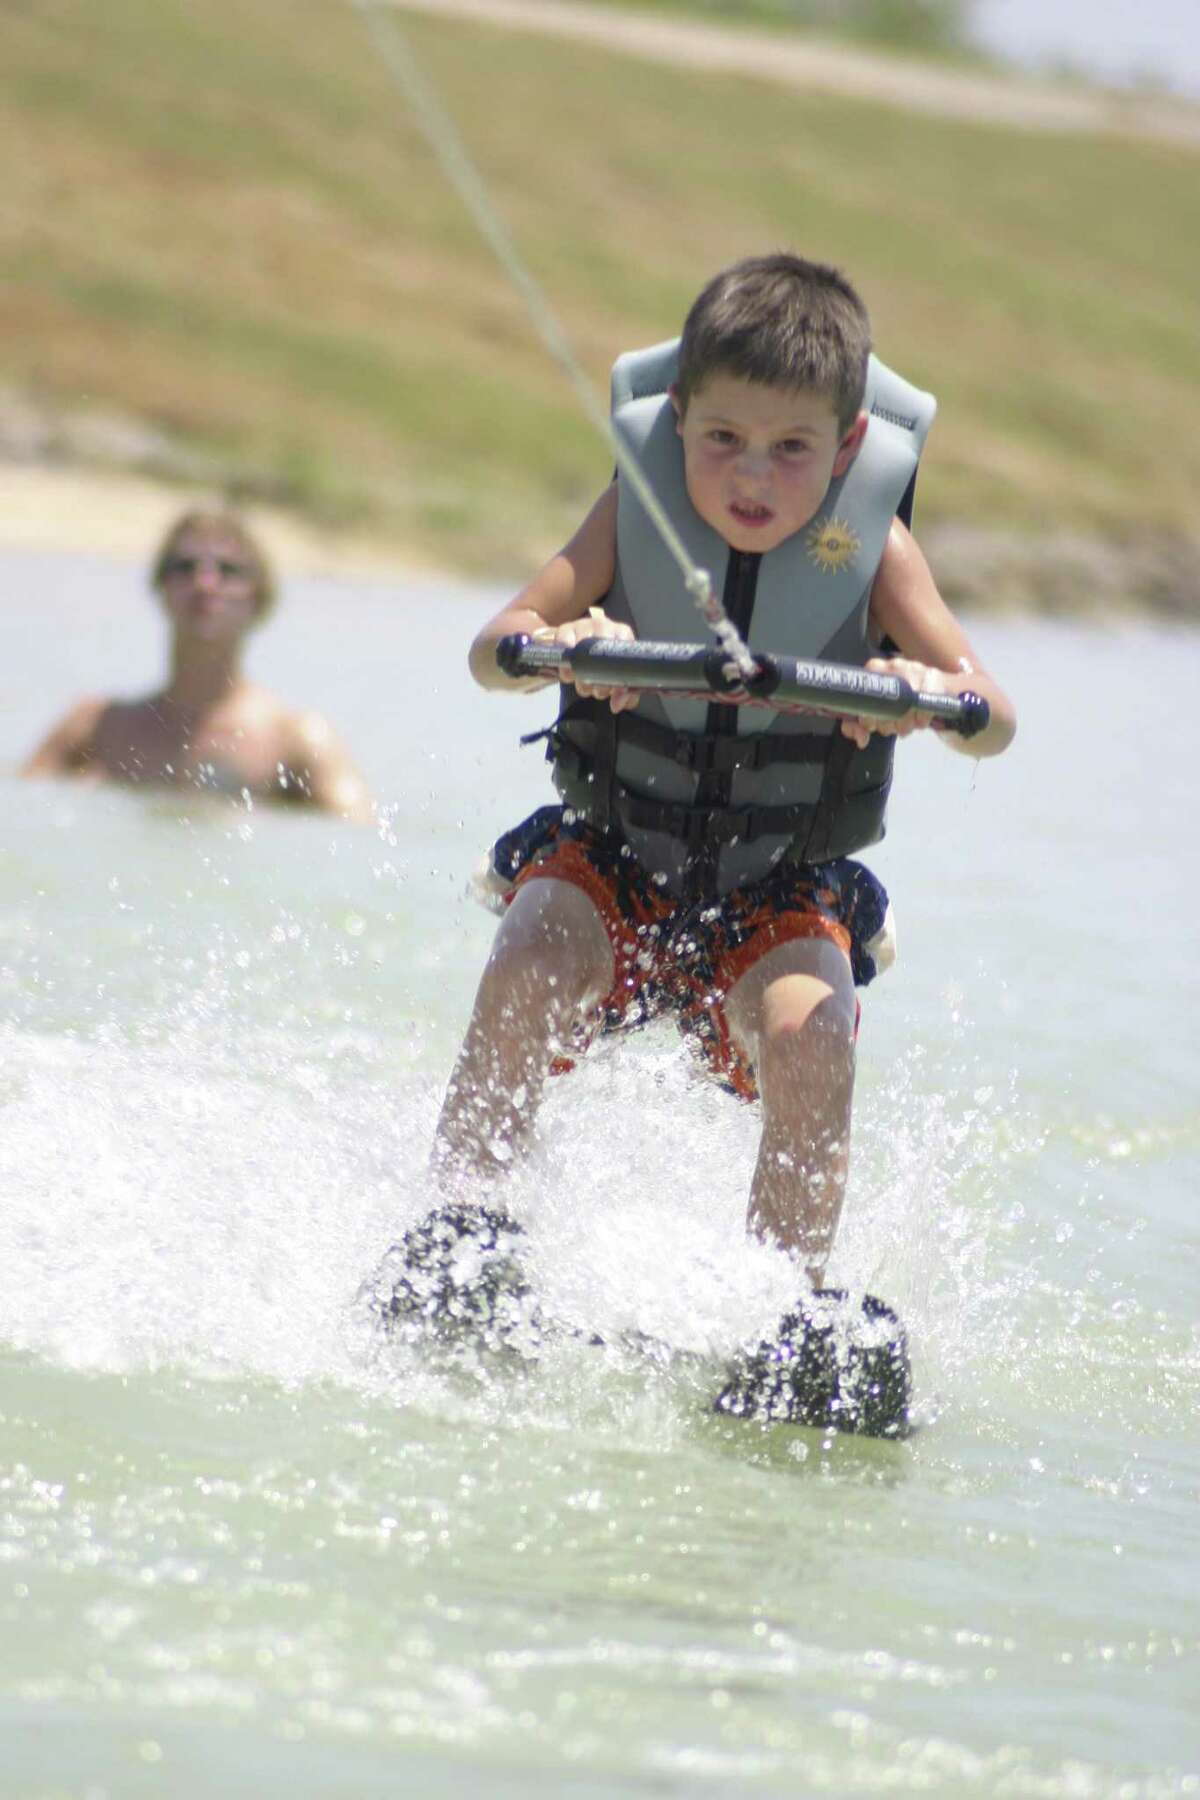 A Texas Ski Ranch camper learns to waterski during a summer program. The 70-acre park also offers cable system wakeboarding, “snow” boarding, and a skate and trampoline park.